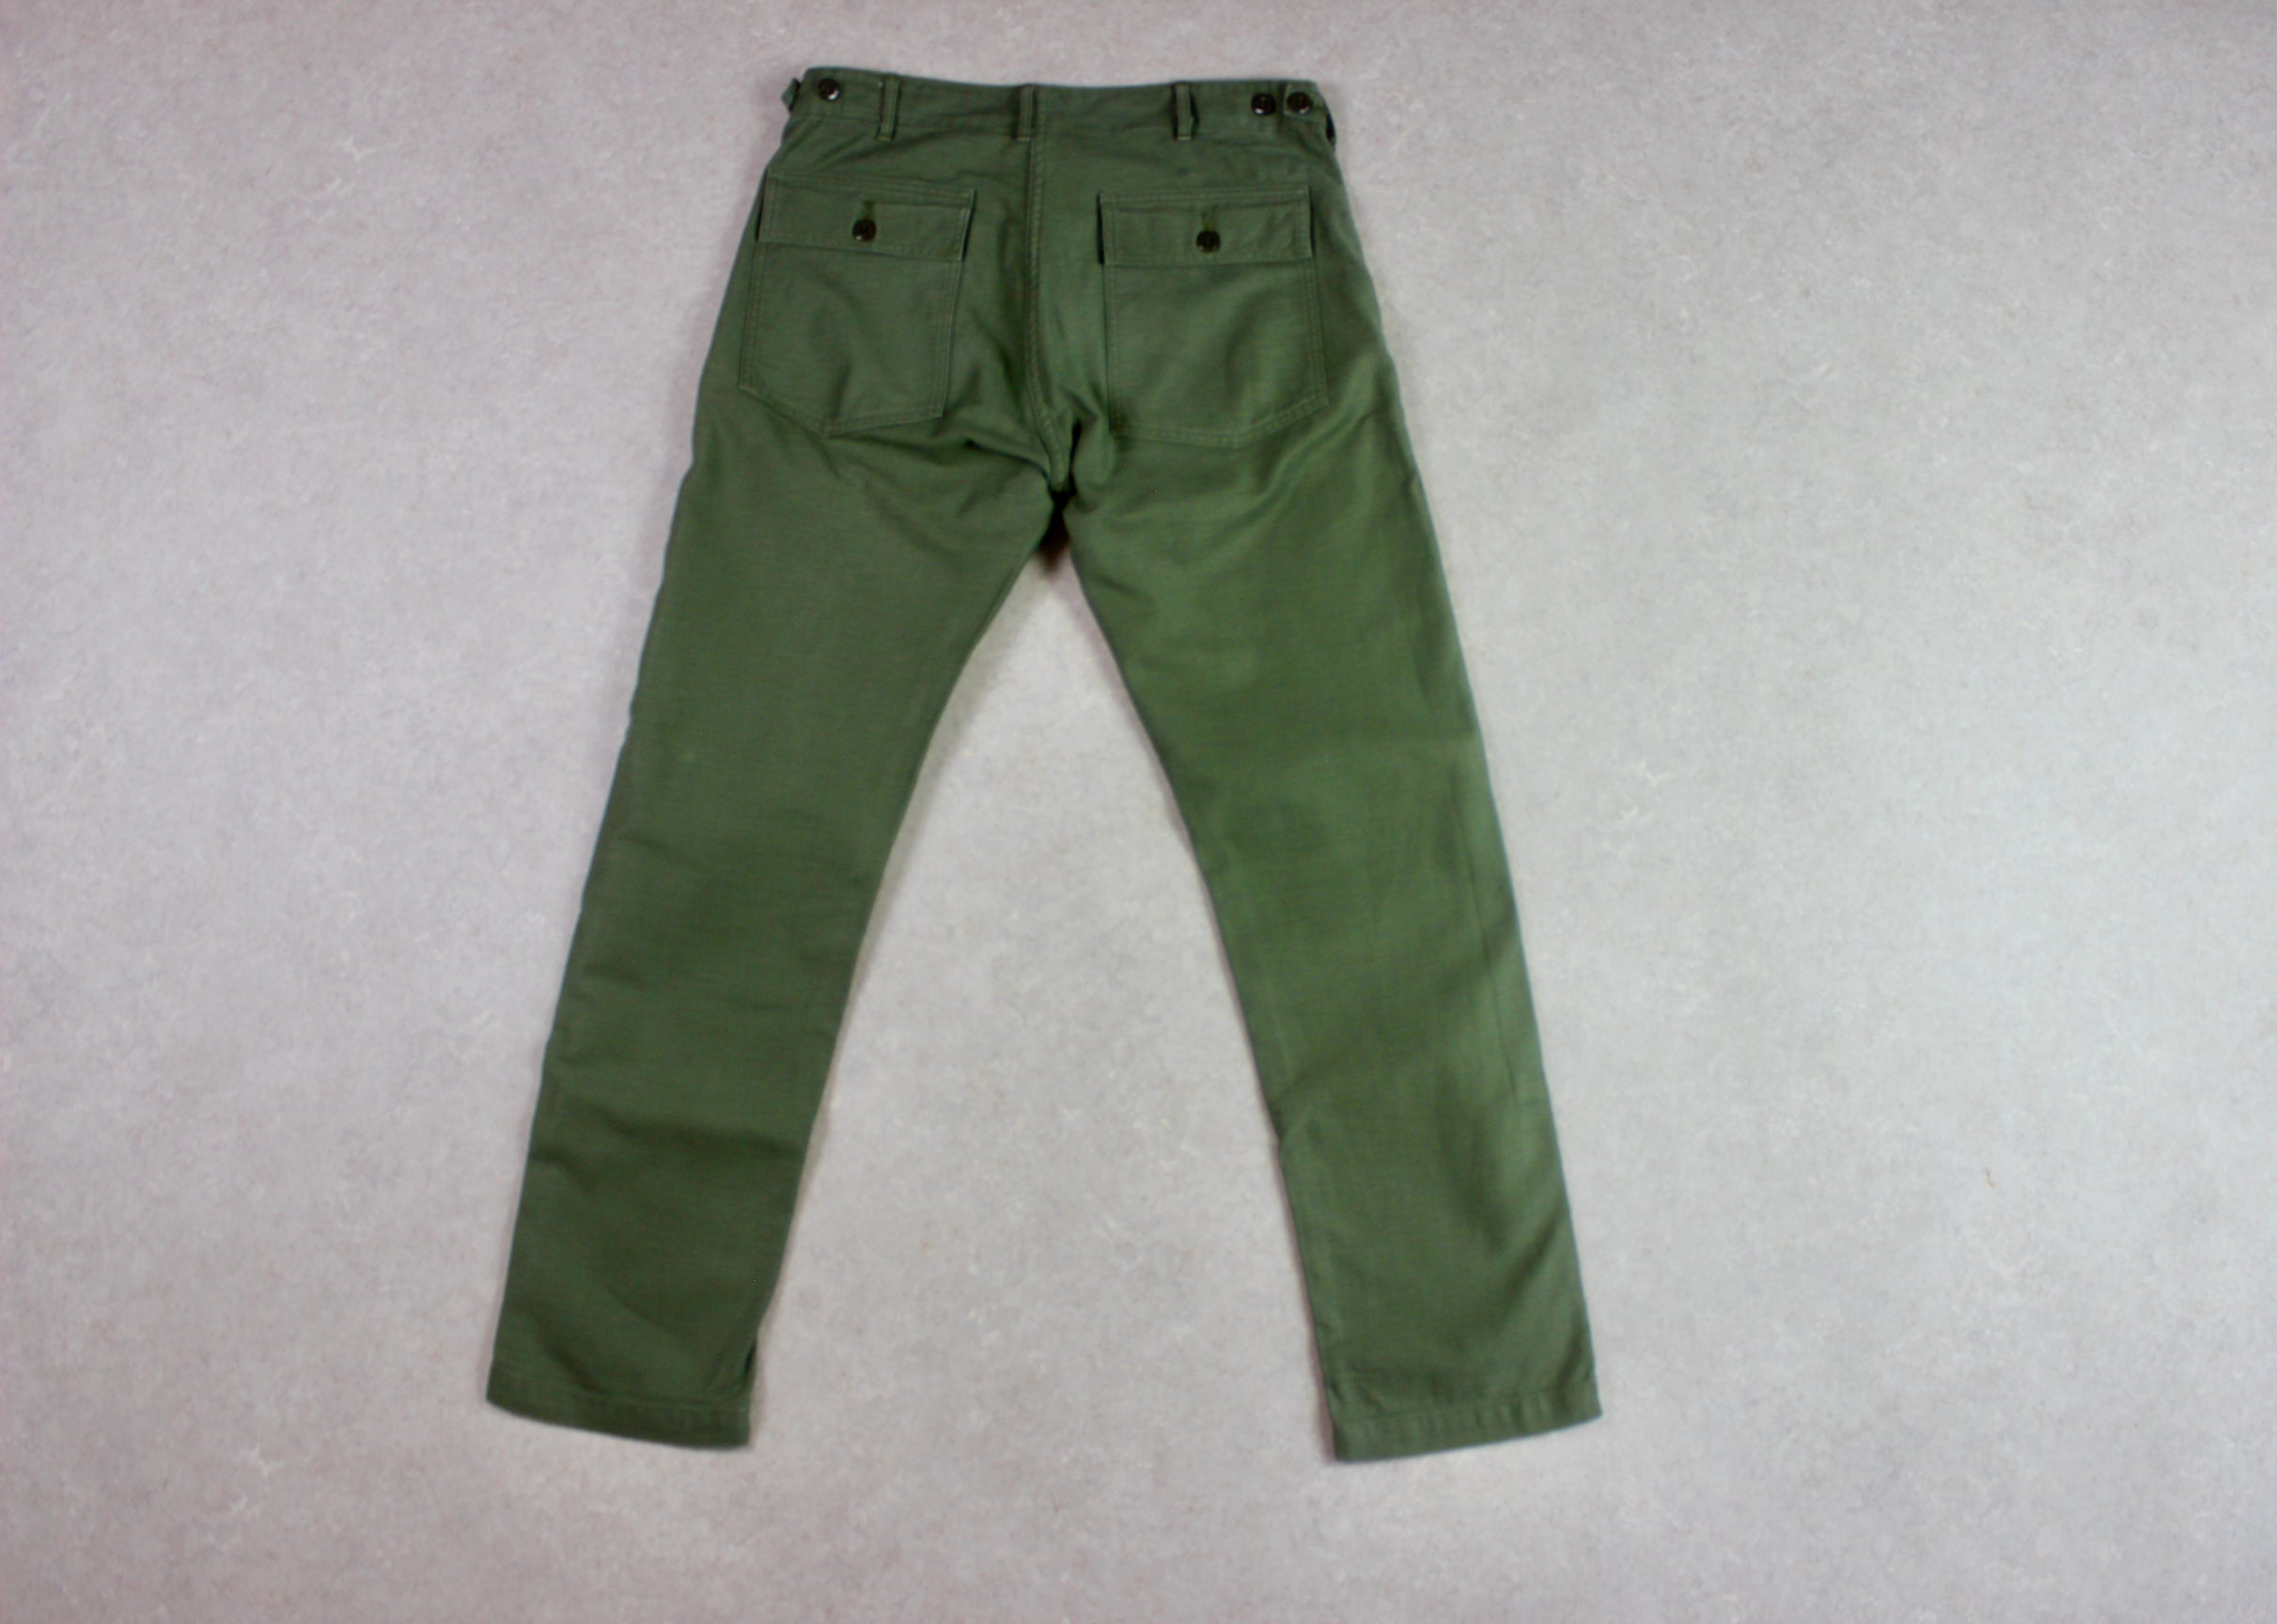 Orslow - US Army Fatigue Pants Trousers  - Green - 2/Small